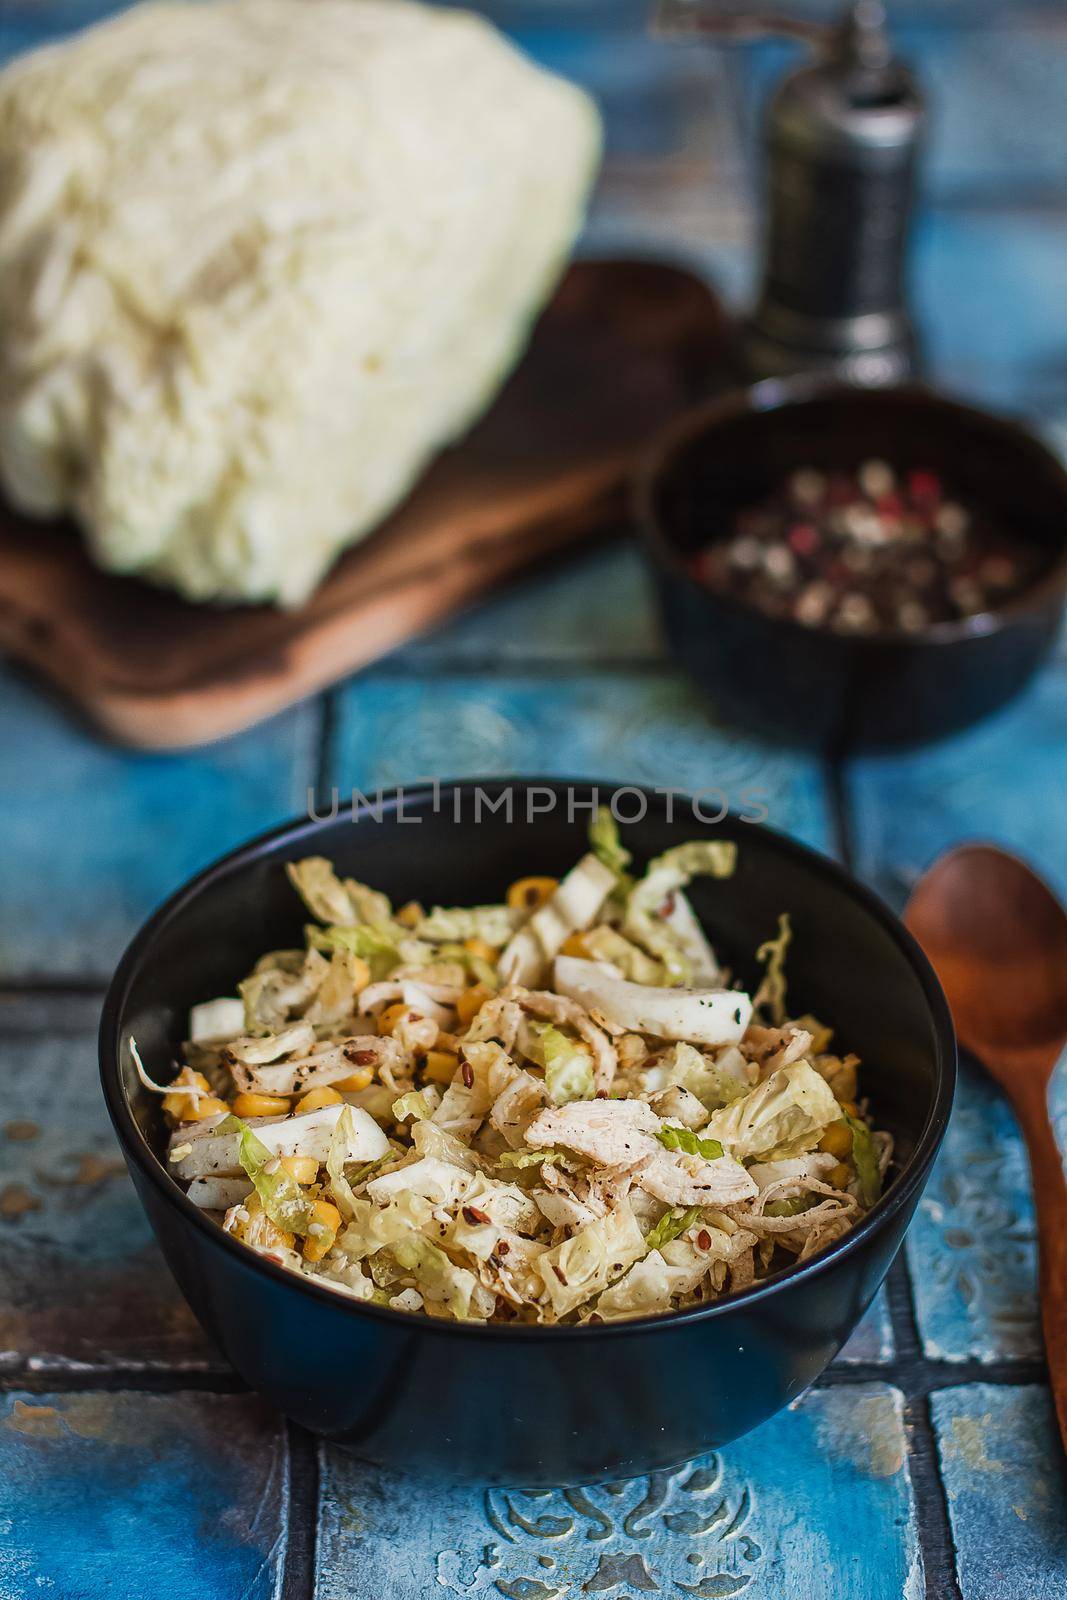 Salad with cabbage, eggs, corns and meat on the plate on rustic tiled table.